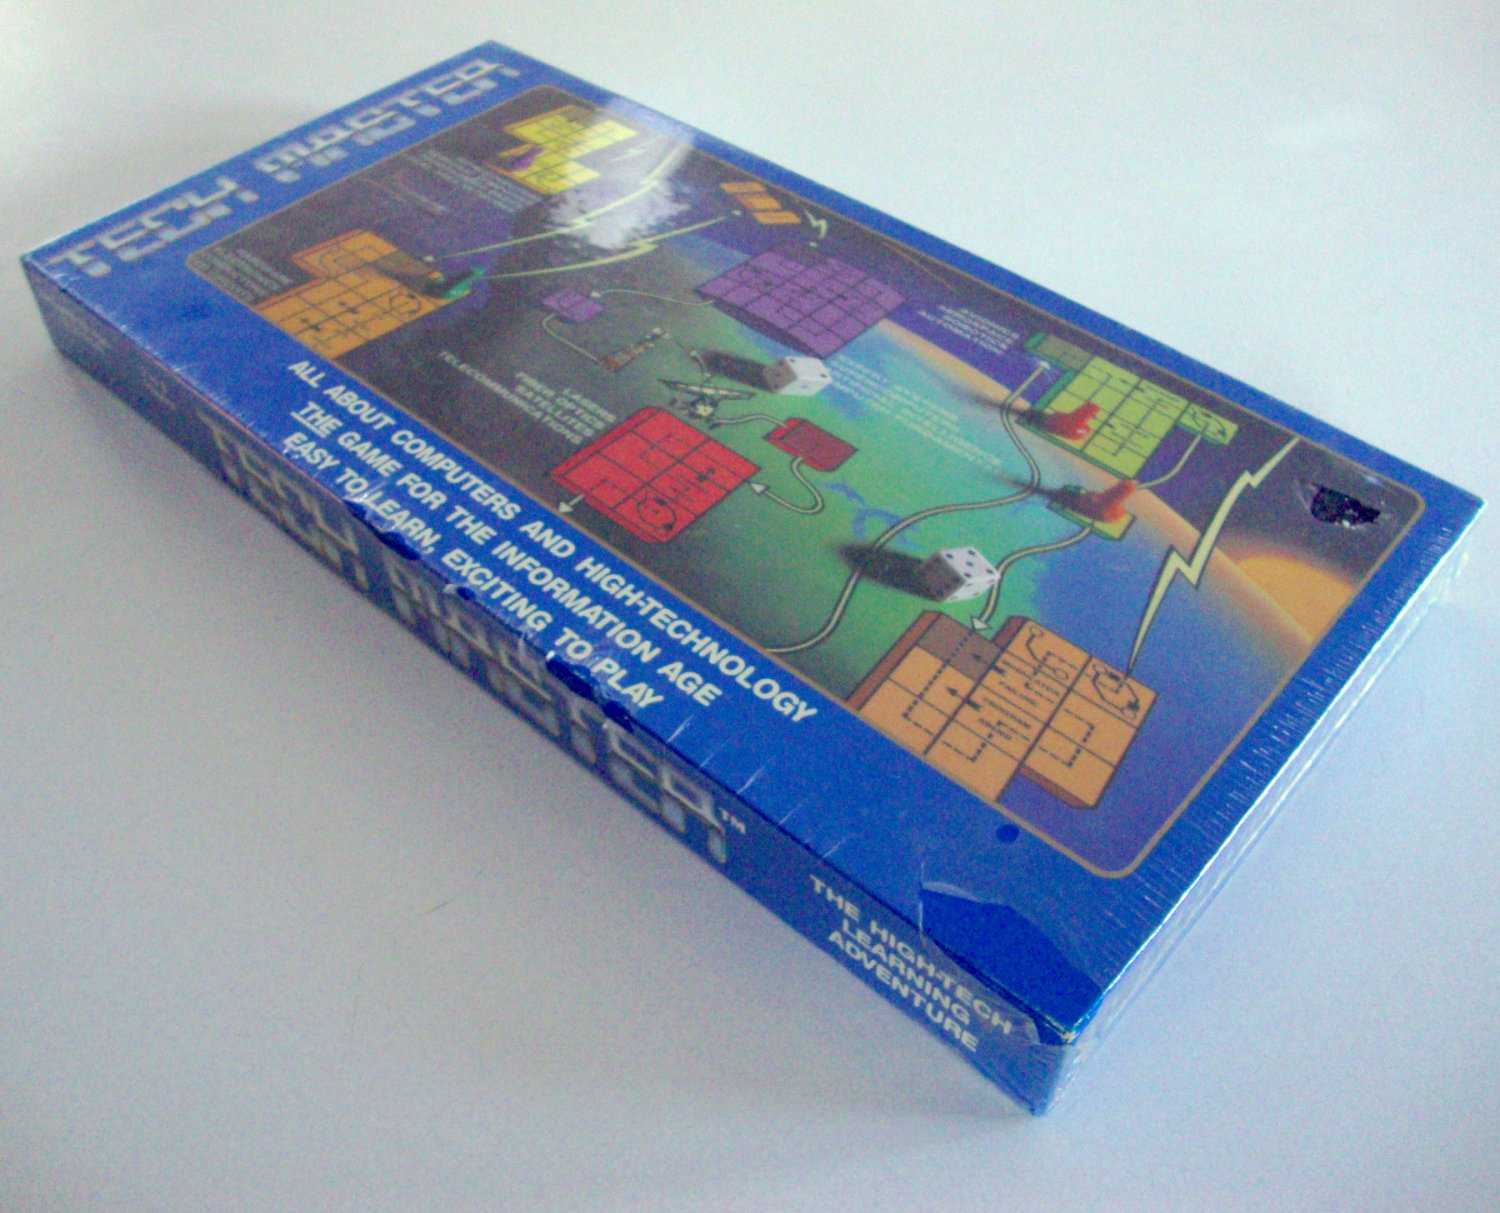 NIB 1985 Futureach Tech Master The Game for the Information Age